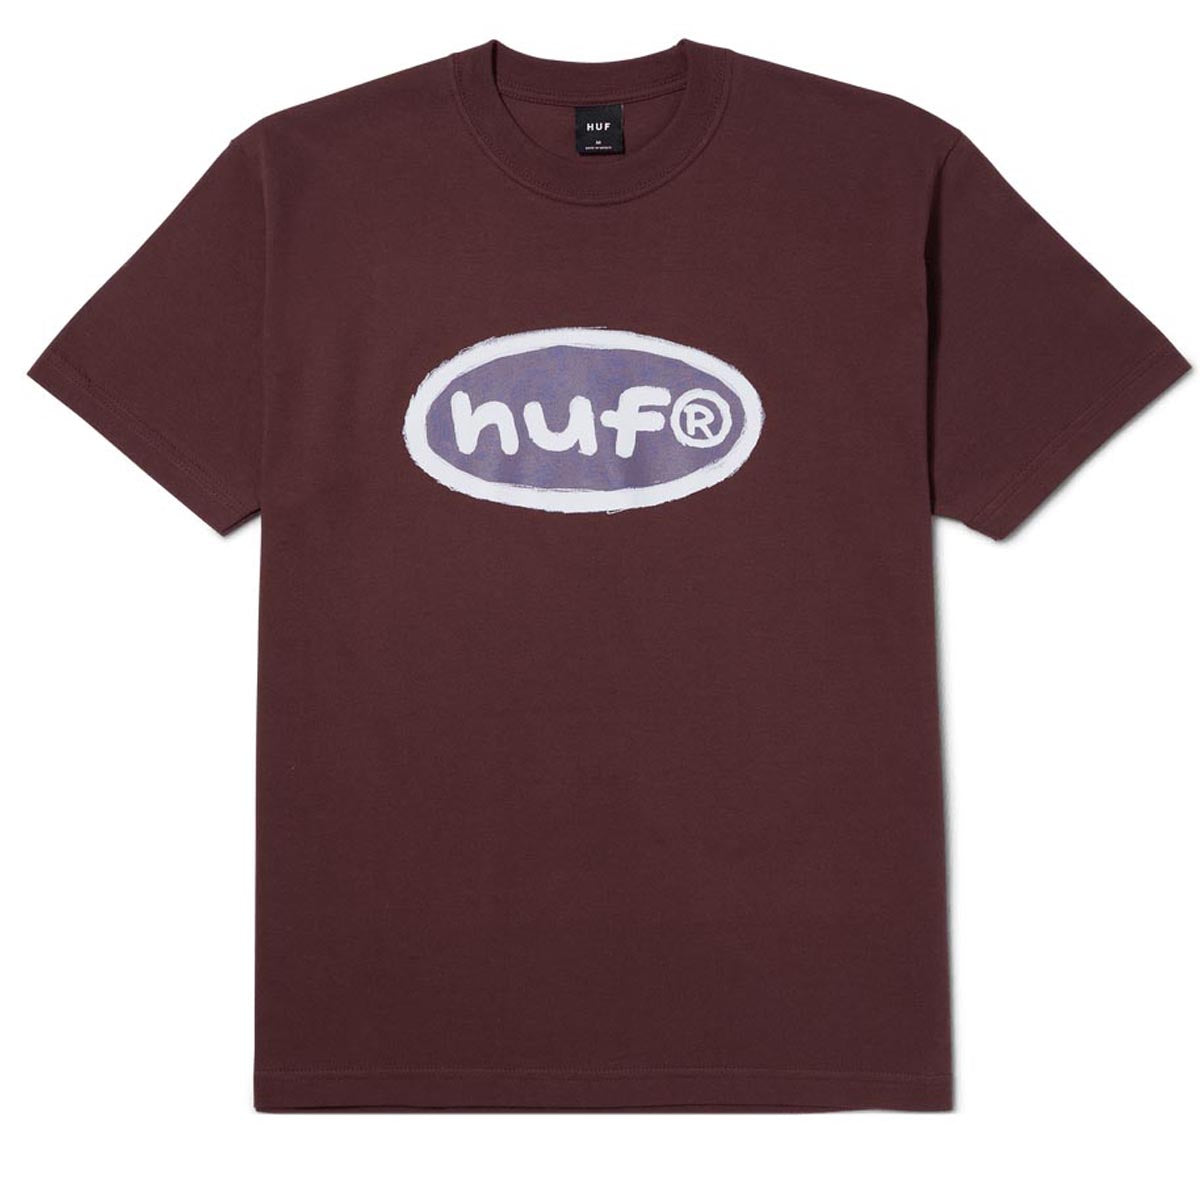 HUF Pencilled In T-Shirt - Eggplant image 1